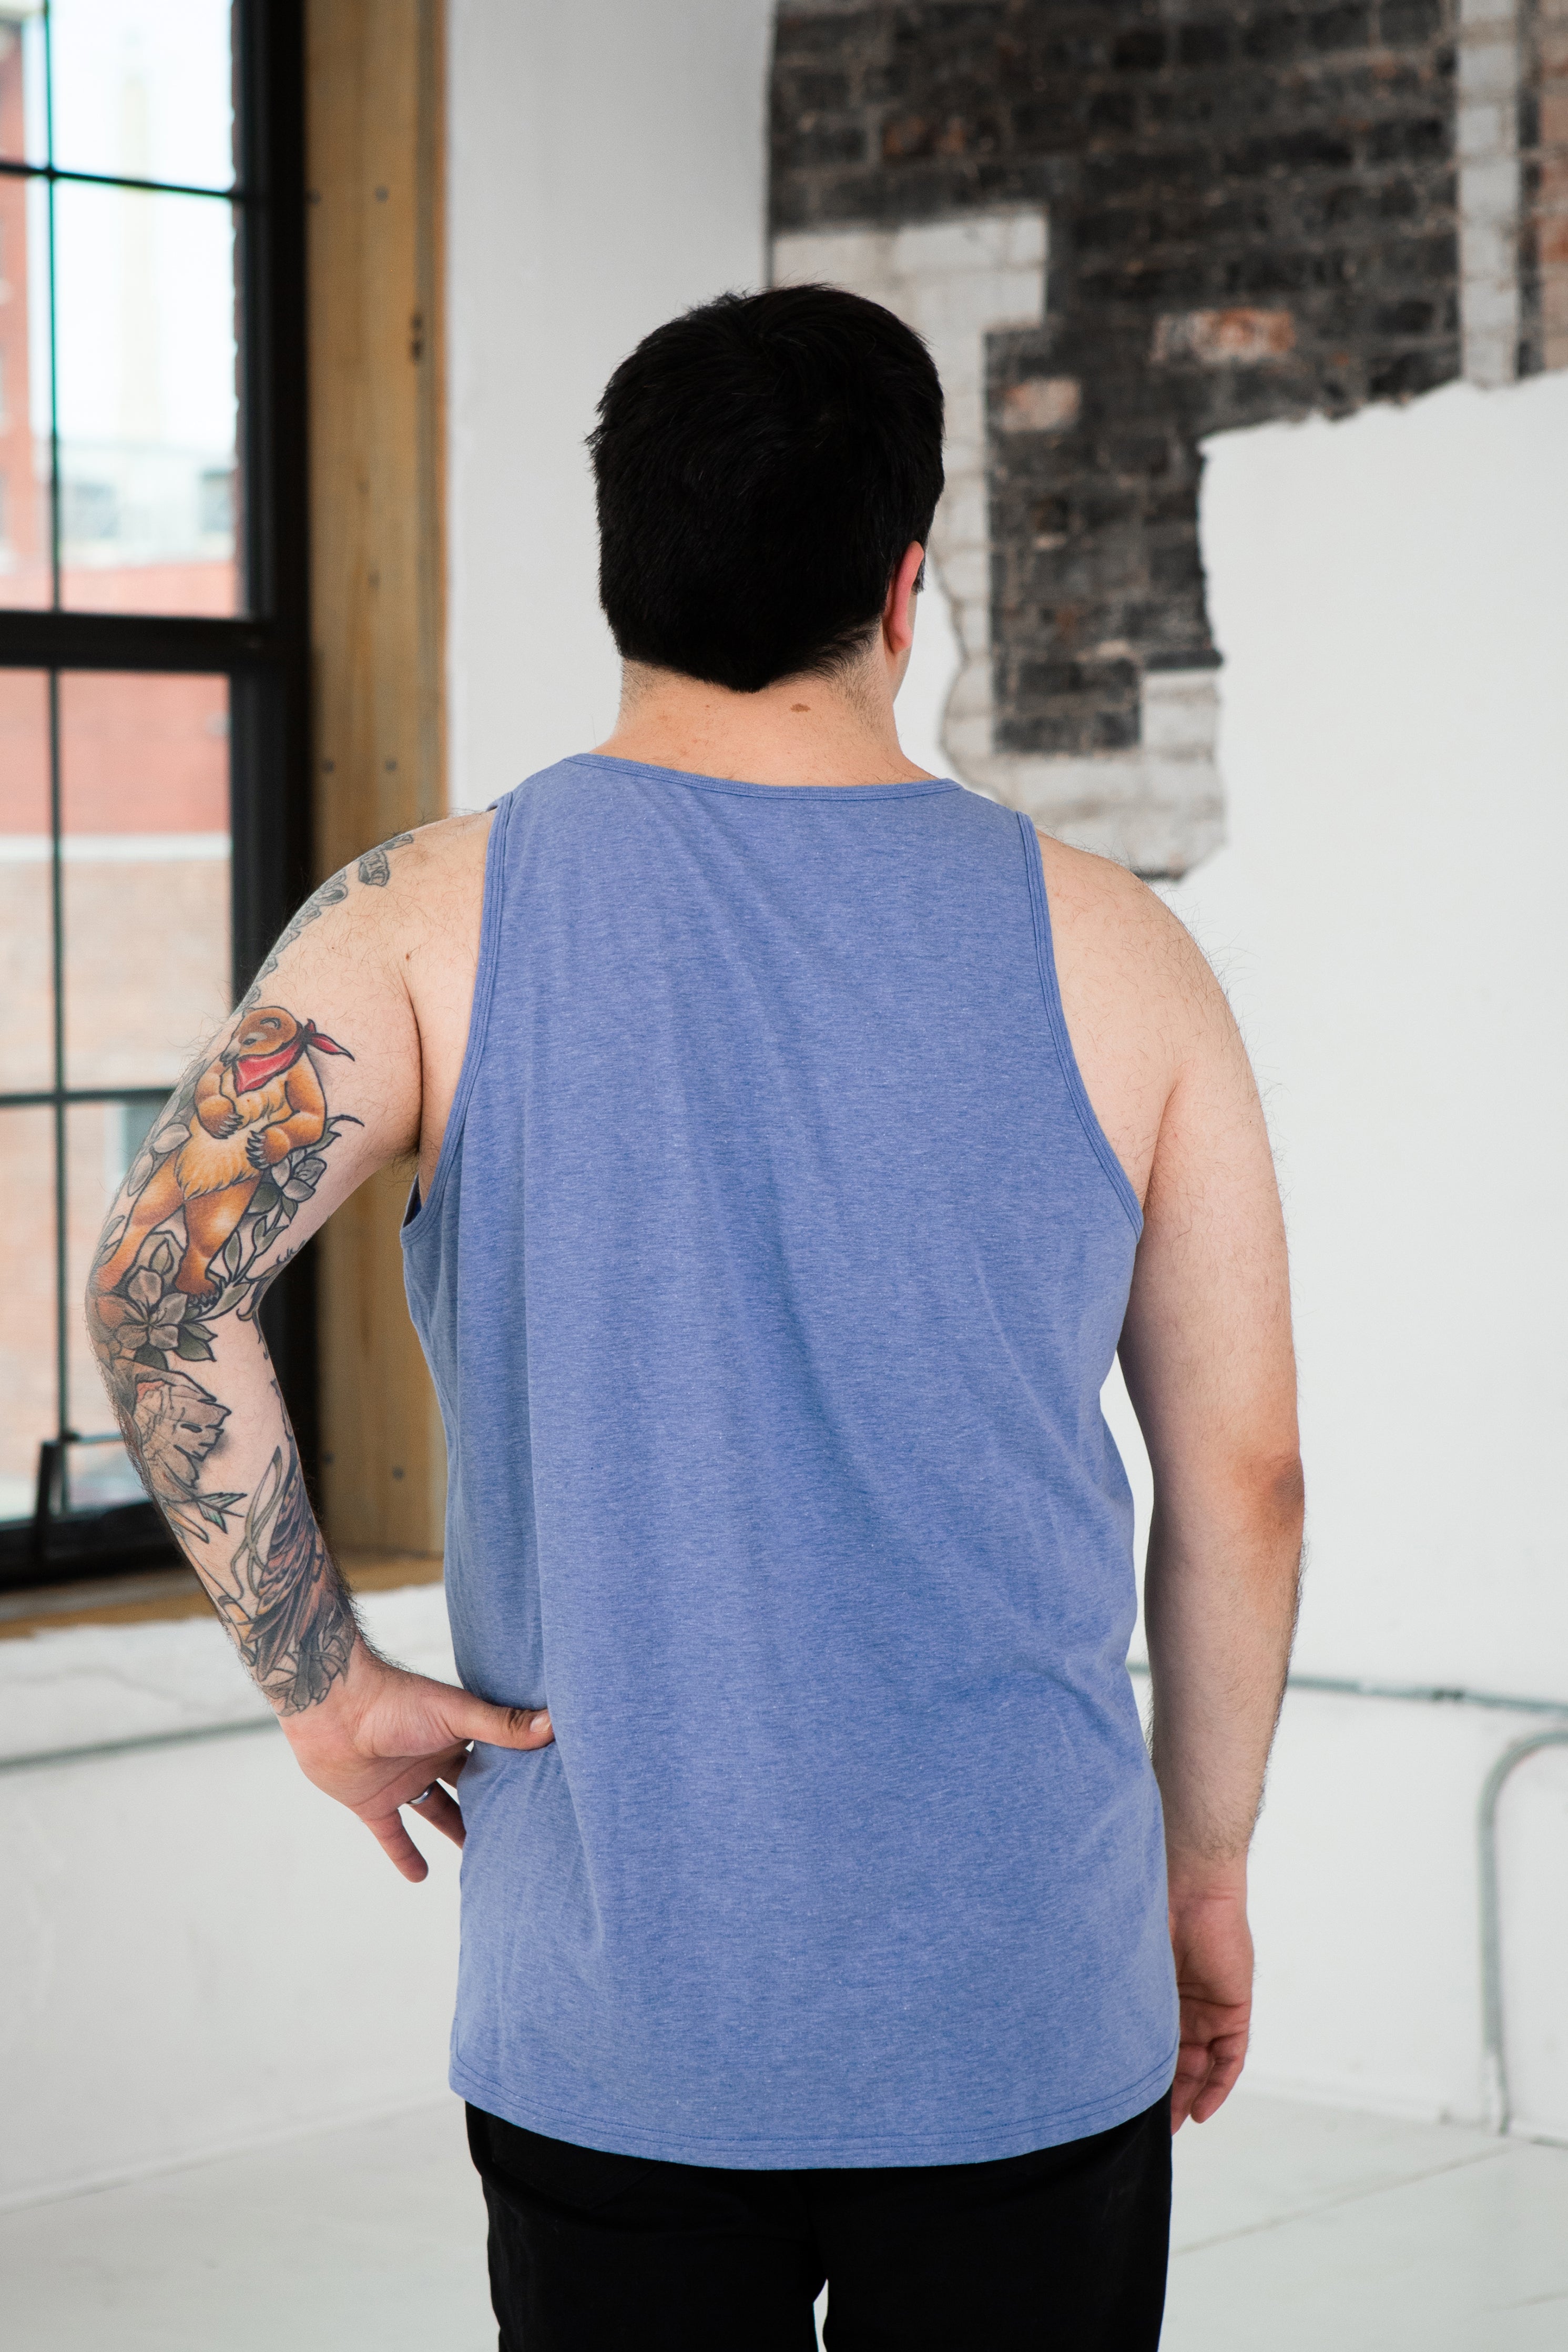 Back View of Male Model wearing GOEX Unisex and Men's Eco Triblend Tank in Light Blue